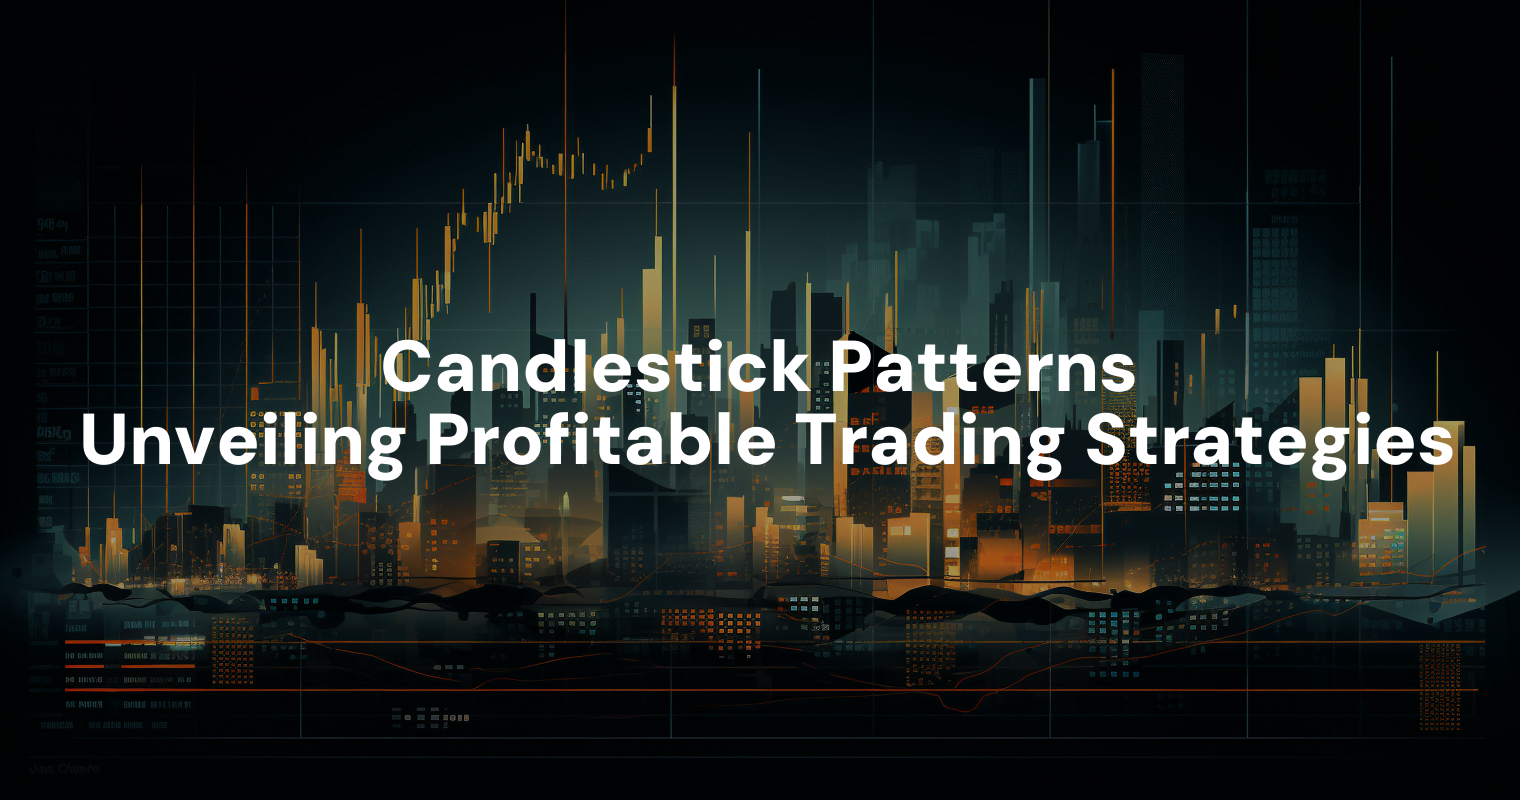 Candlestick Patterns: Unveiling Profitable Trading Strategies